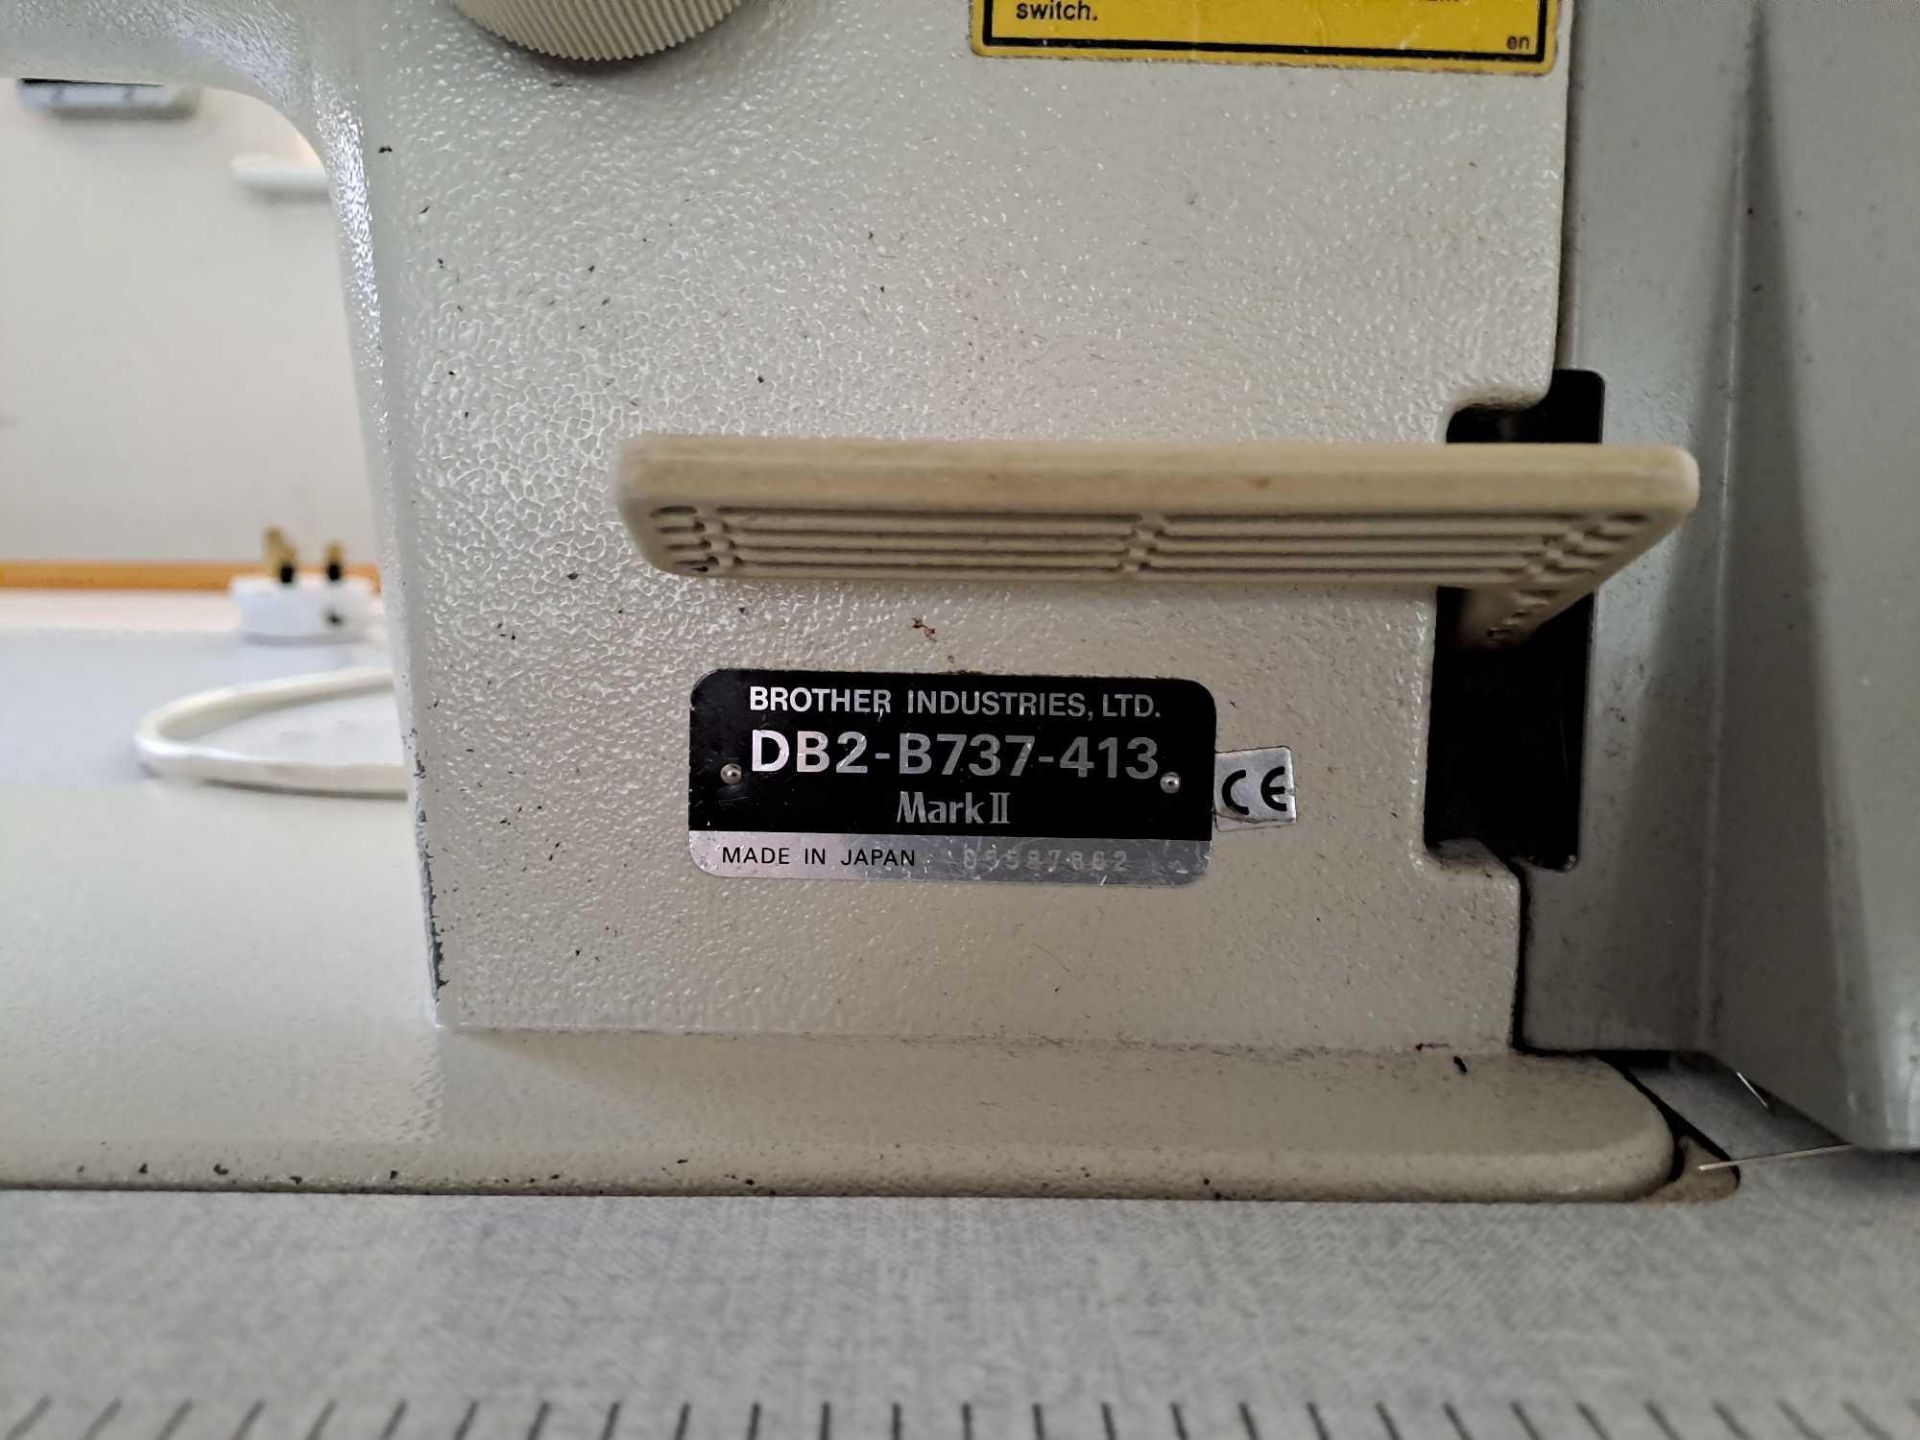 Brother DB2-B737-413 Sewing Machine - Image 3 of 5